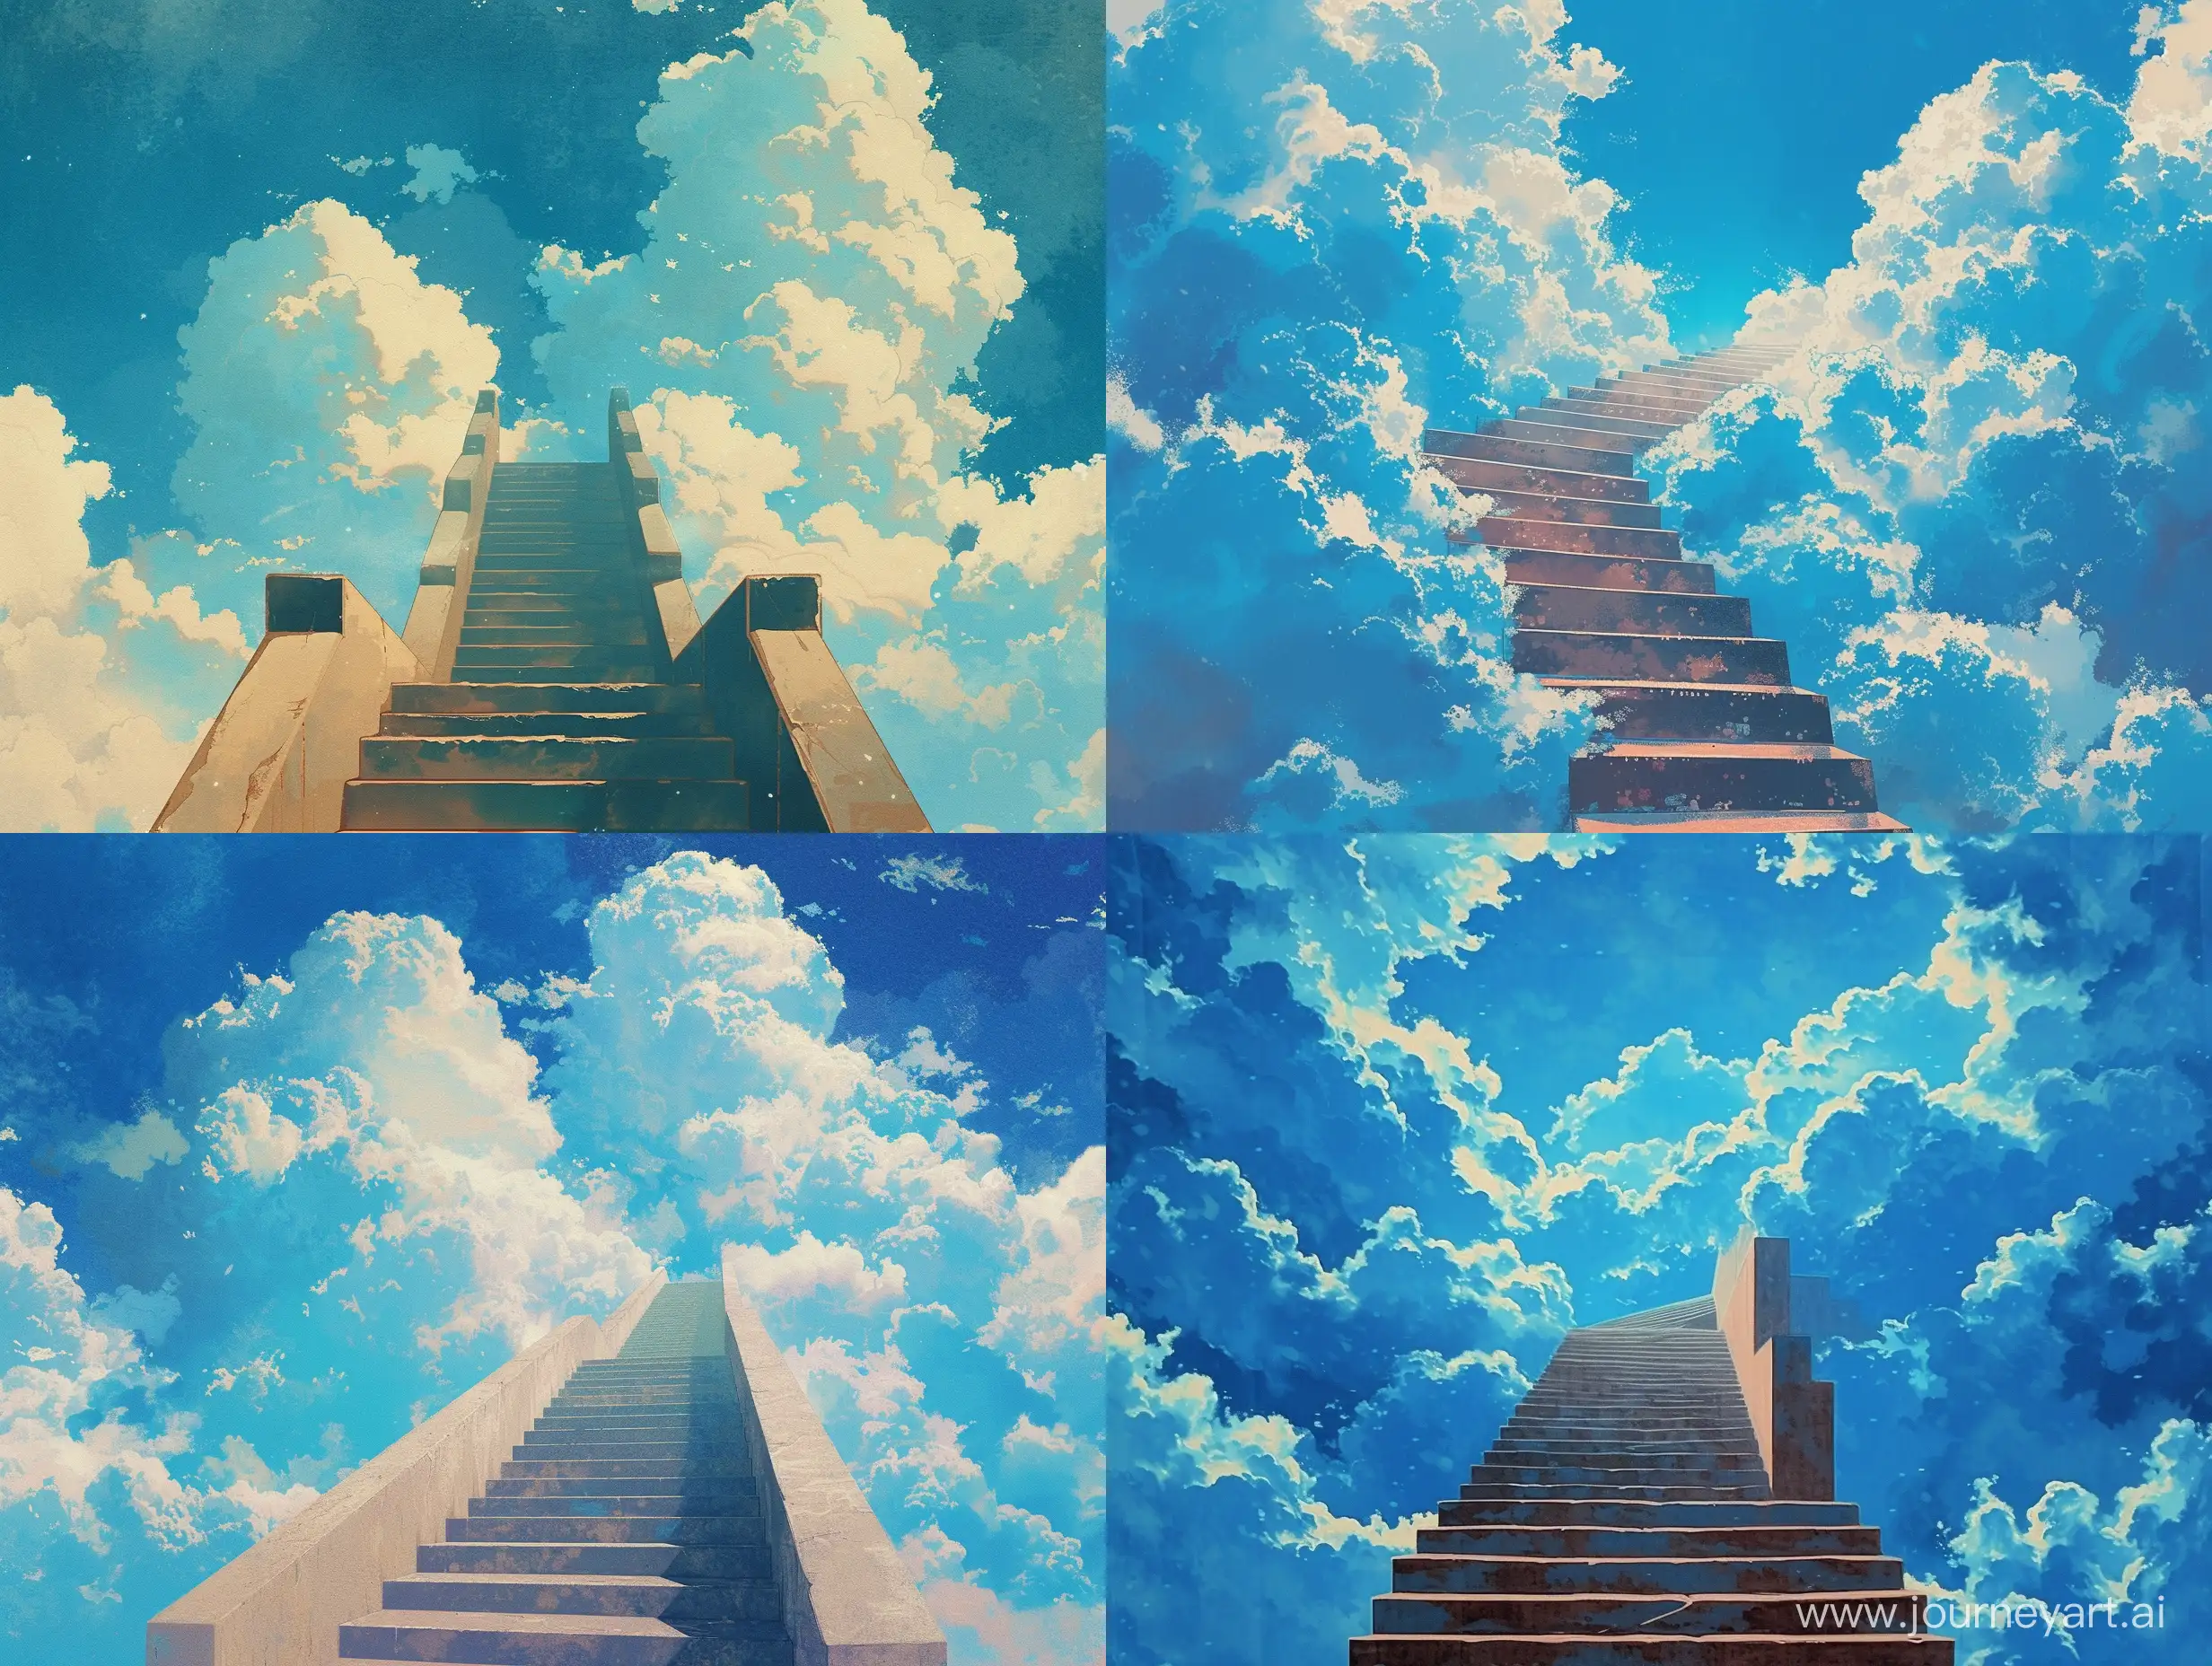 Retro-Stairway-to-Cloudy-Skies-Syd-Meads-Nostalgic-Synthwave-Art-Poster